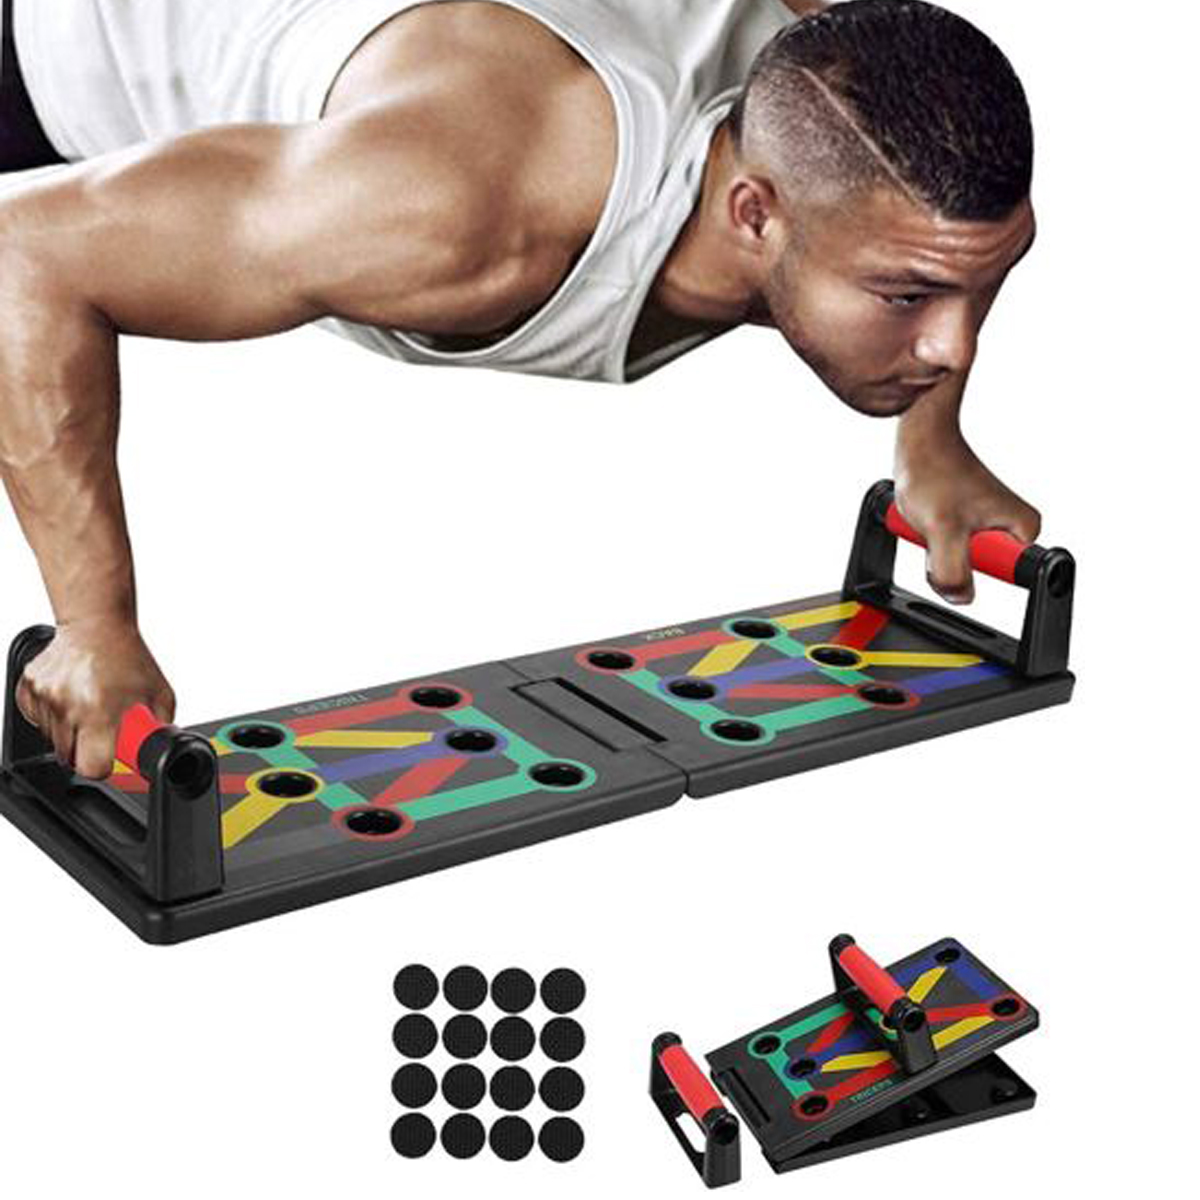 Wiseek Push Up Board with Resistance Bands Portable /& Foldable Muscle Board Home Fitness Strength Training Equipment for Indoor Outdoor 20 in 1 Press Up Board